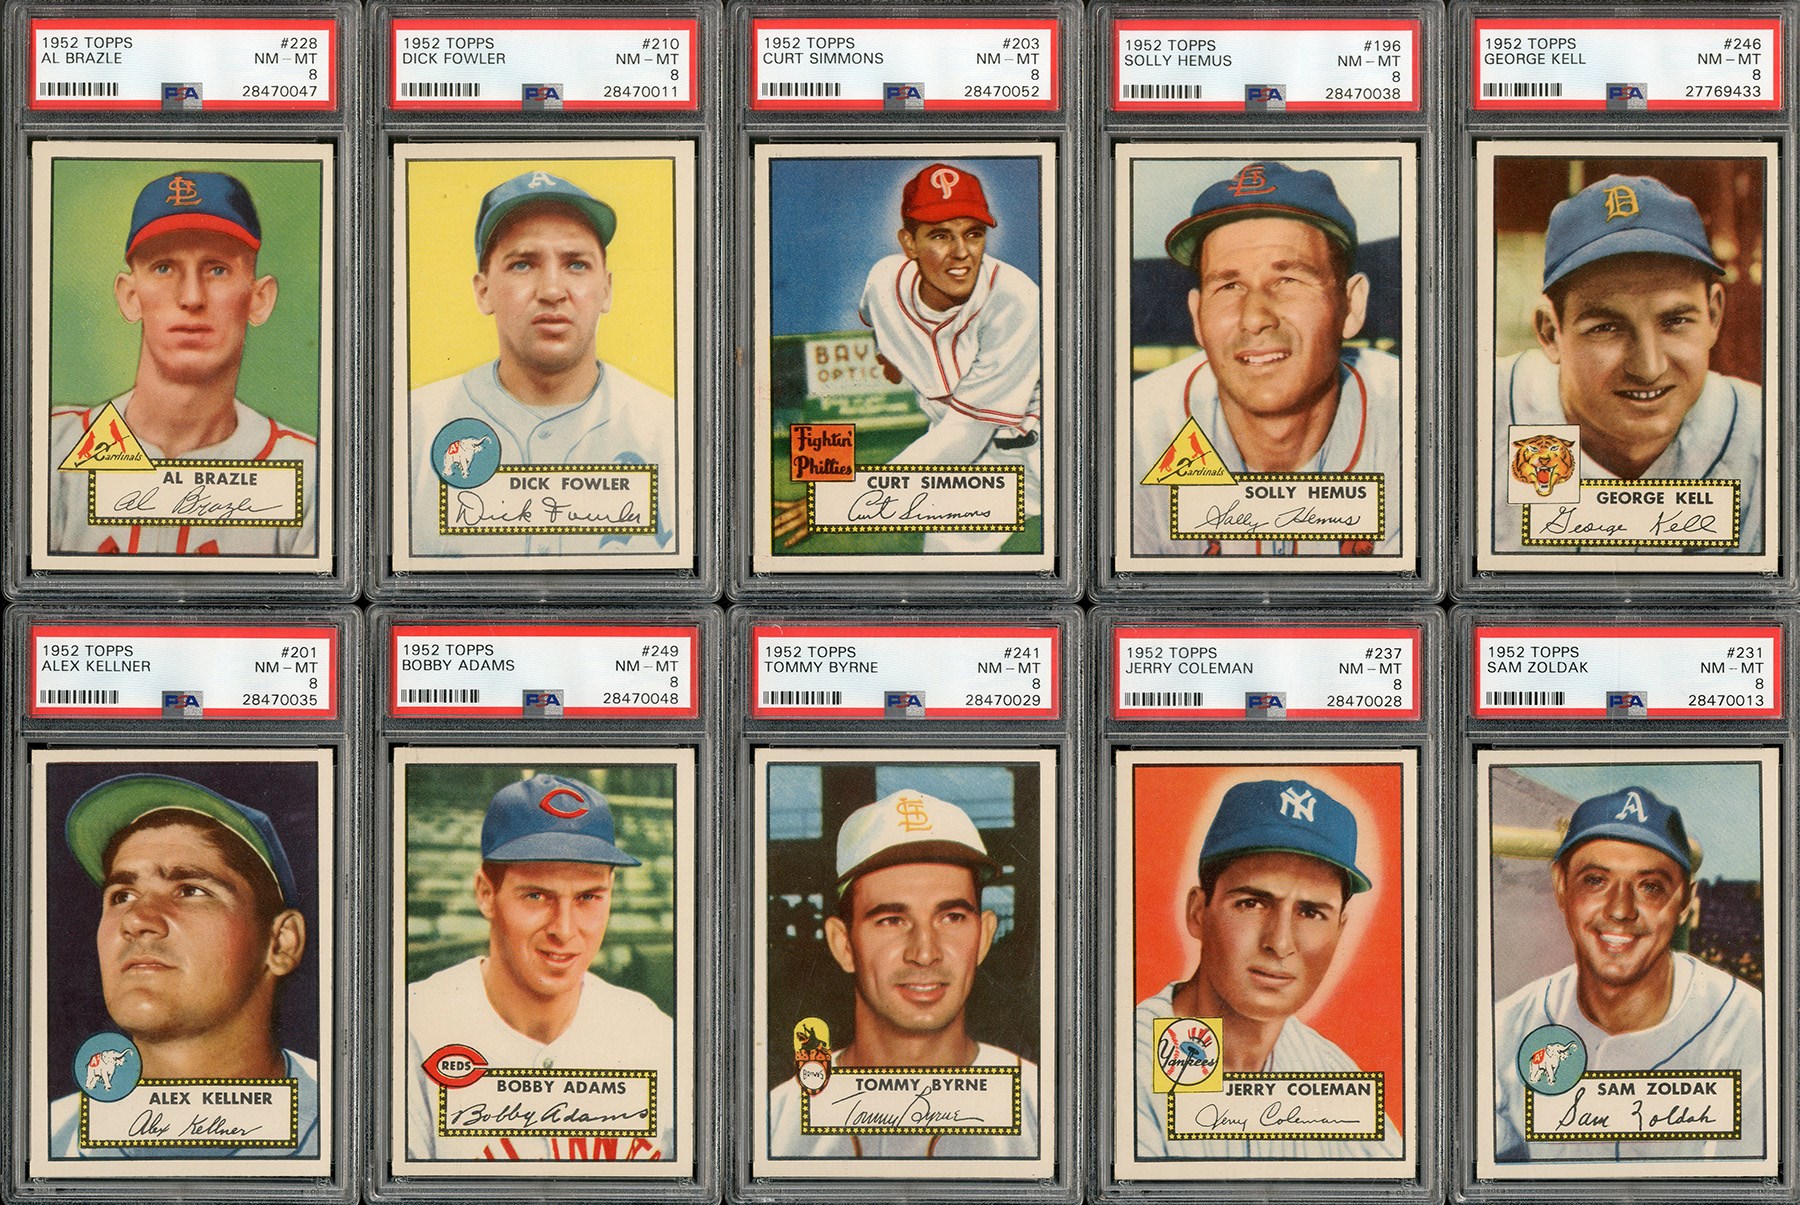 Baseball and Trading Cards - 1952 Topps HIGH GRADE Collection of 12 Cards - All PSA Graded NM-MT 8!